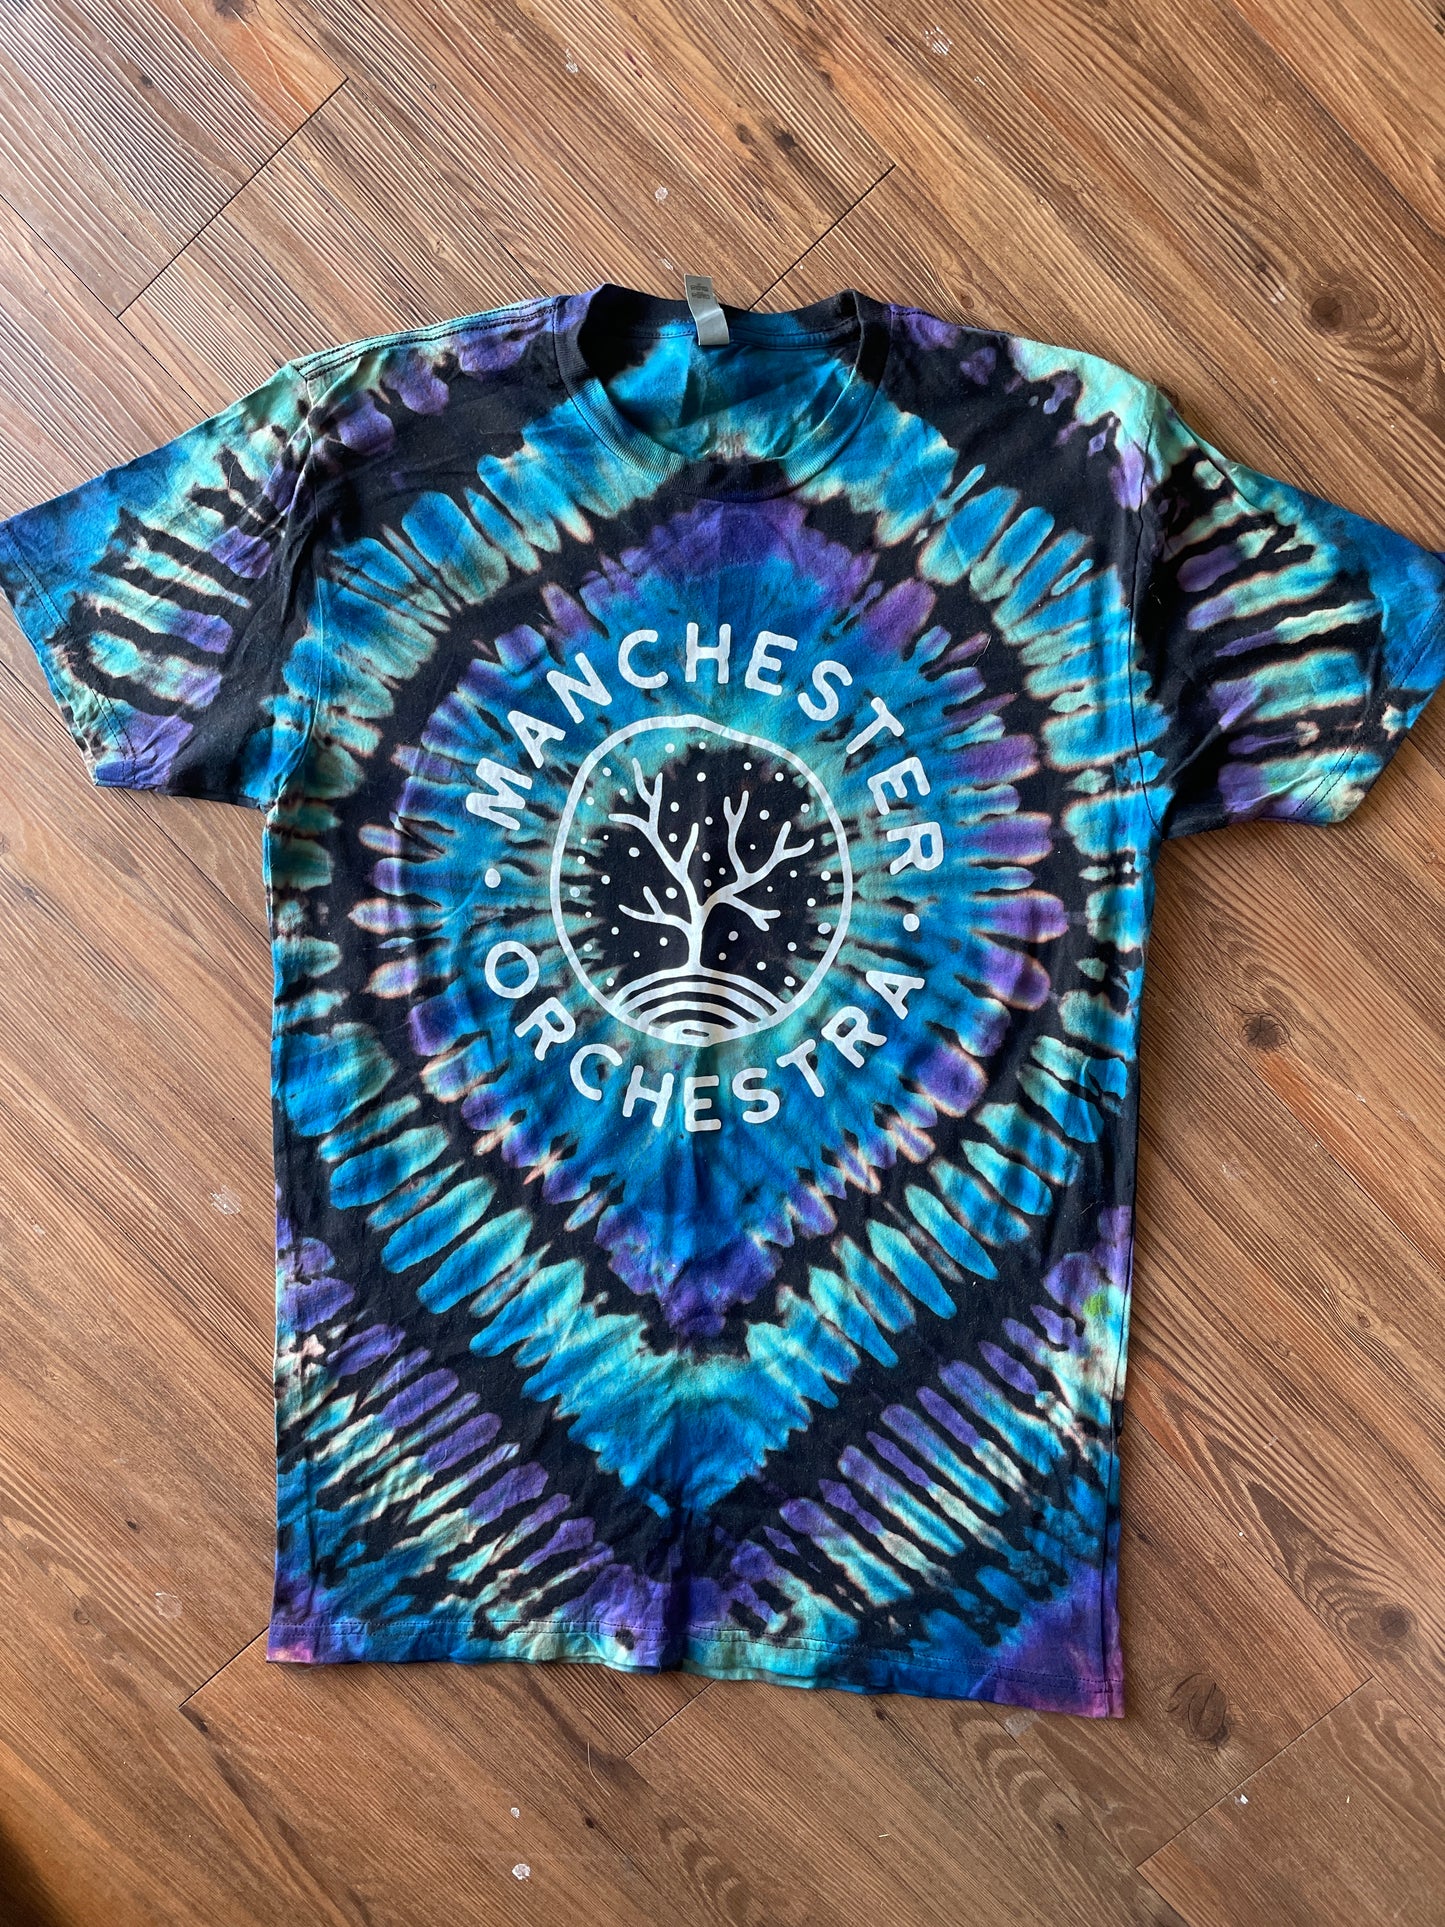 LARGE Men’s Manchester Orchestra Tie Dye T-Shirt | Blue and Purple Reverse Tie Dye Long Sleeve